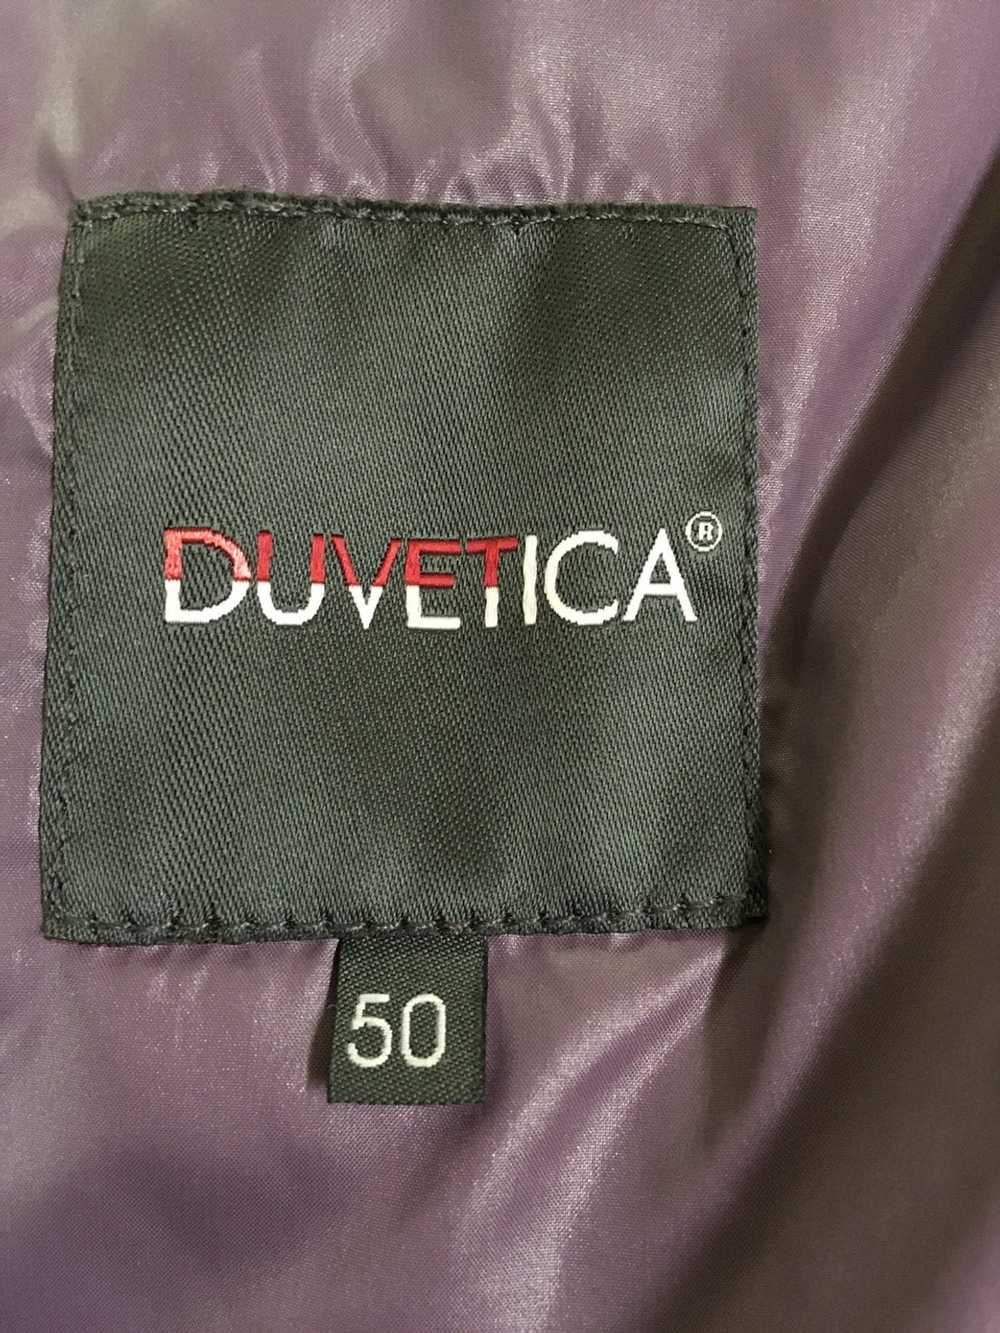 Duvetica Duvetica Hooded Down Jacket - image 5